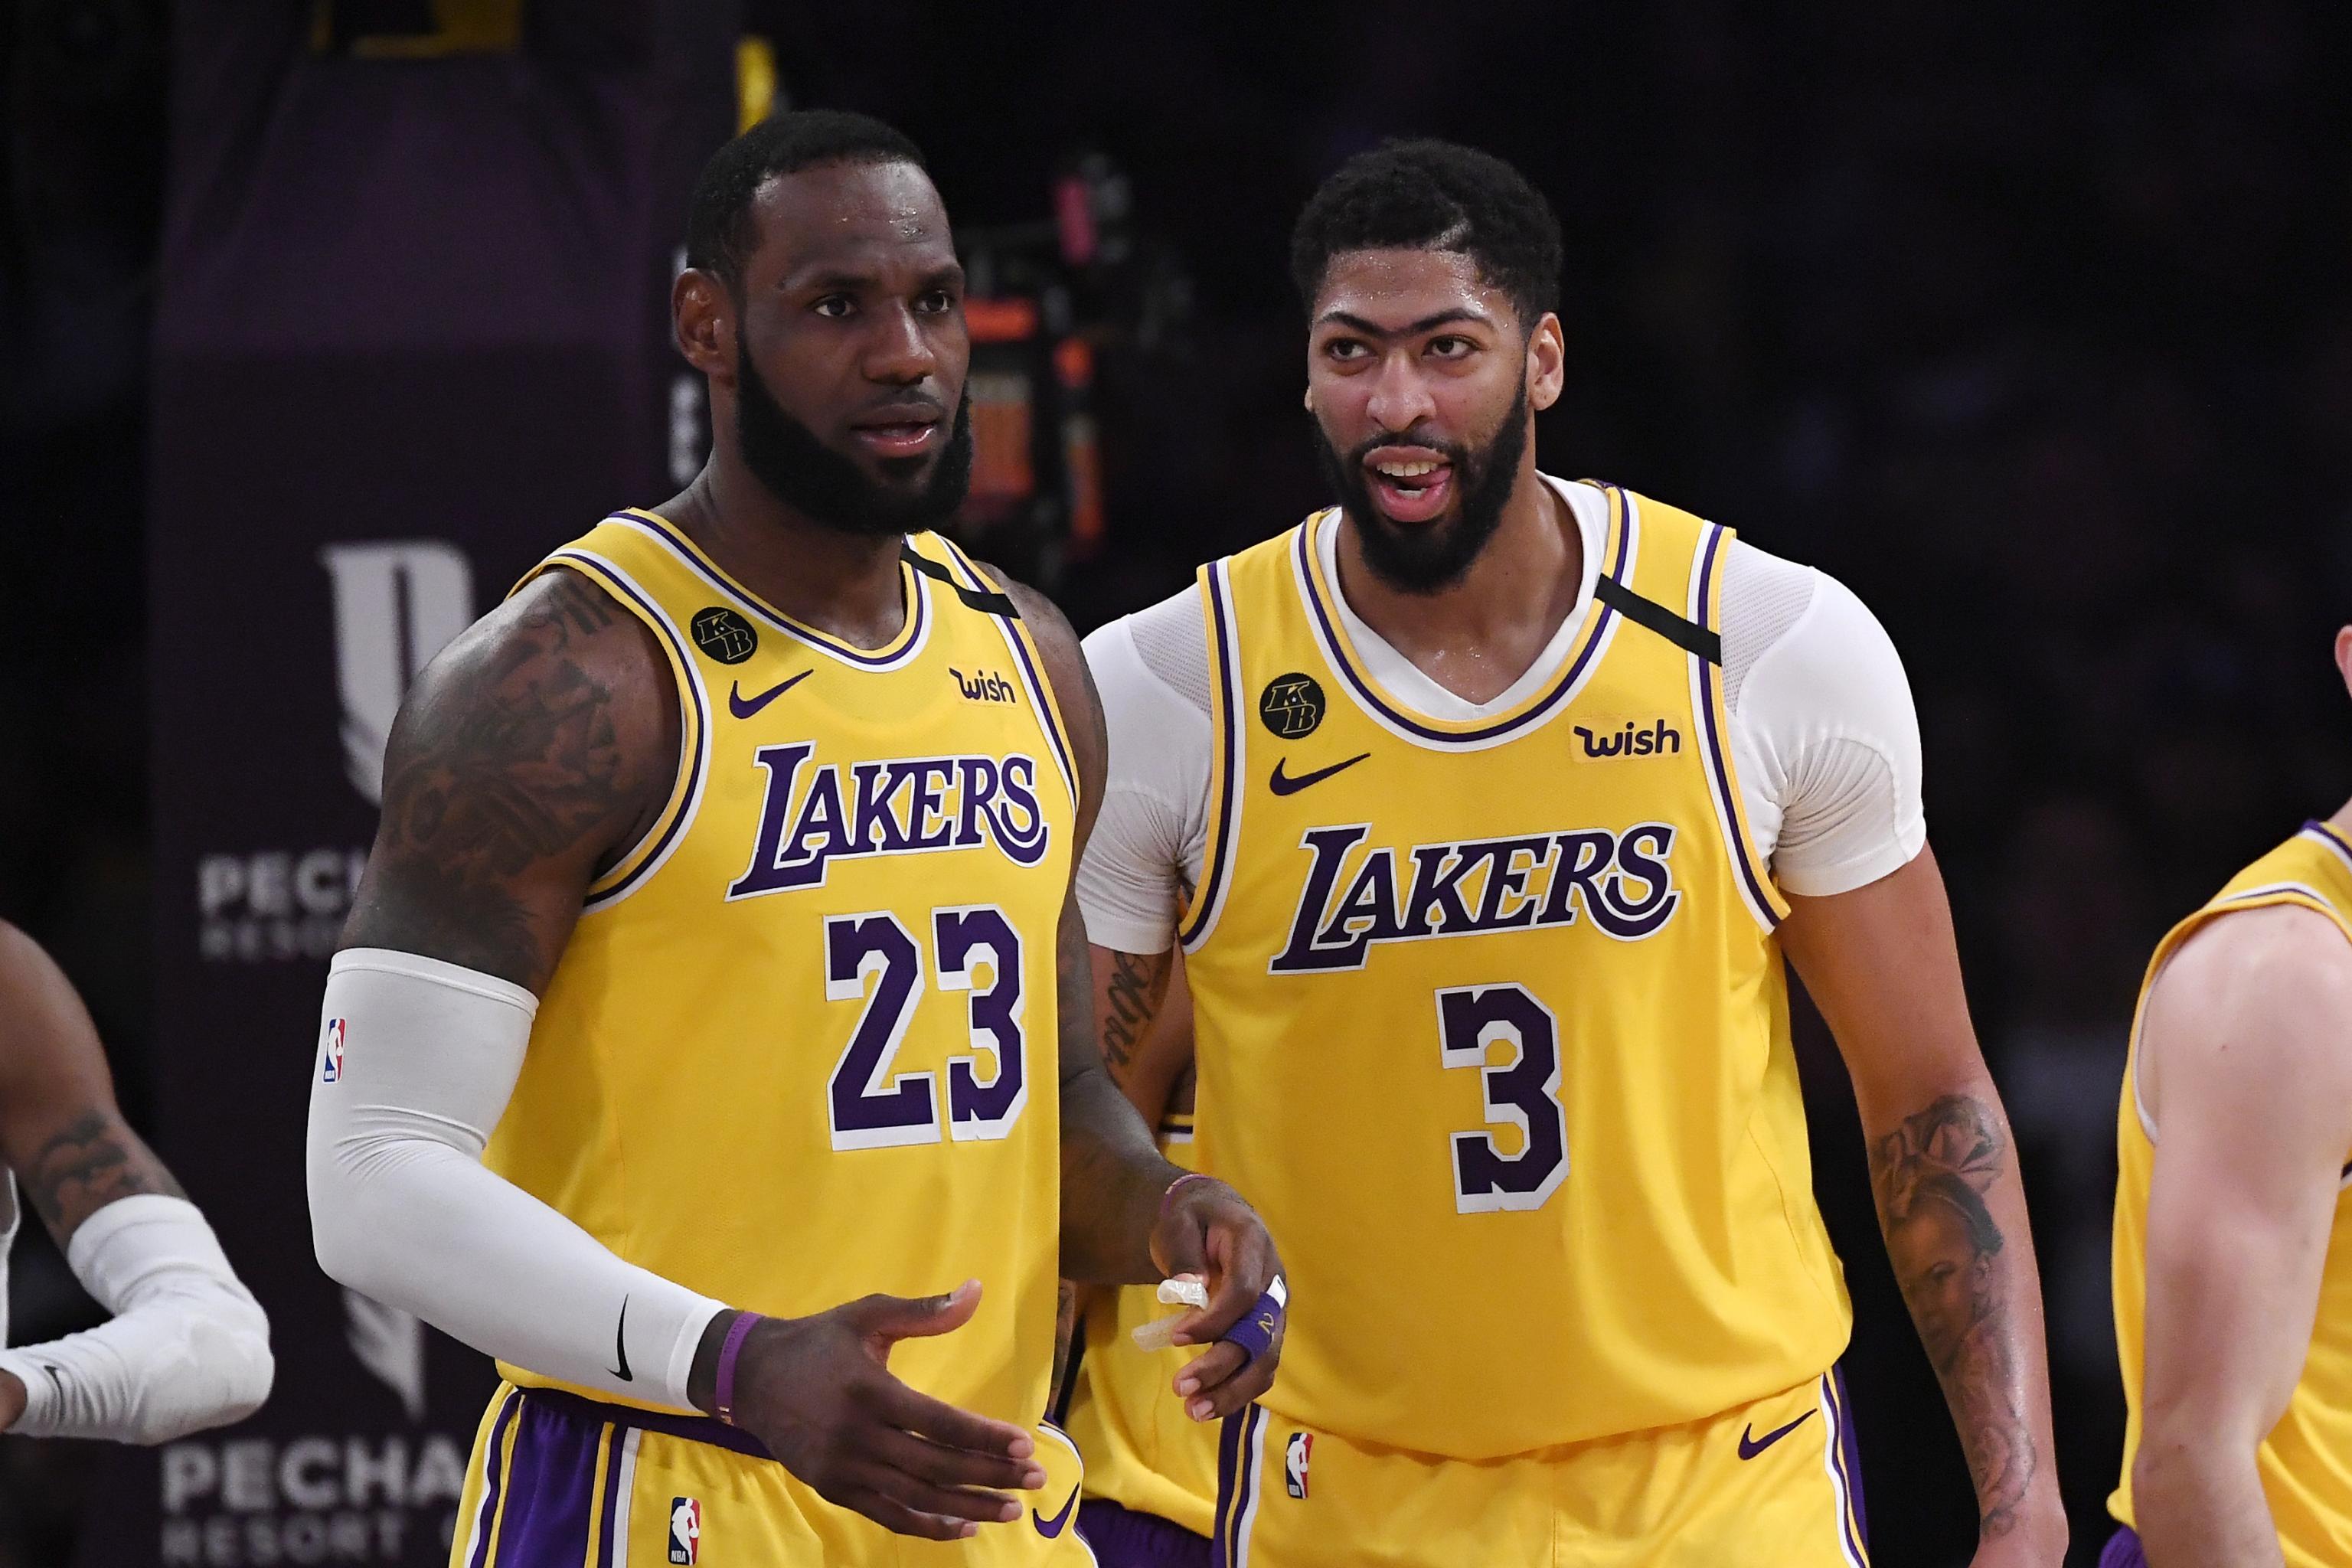 LeBron James Won't Trade No. 23 Jersey to Anthony Davis for 2020